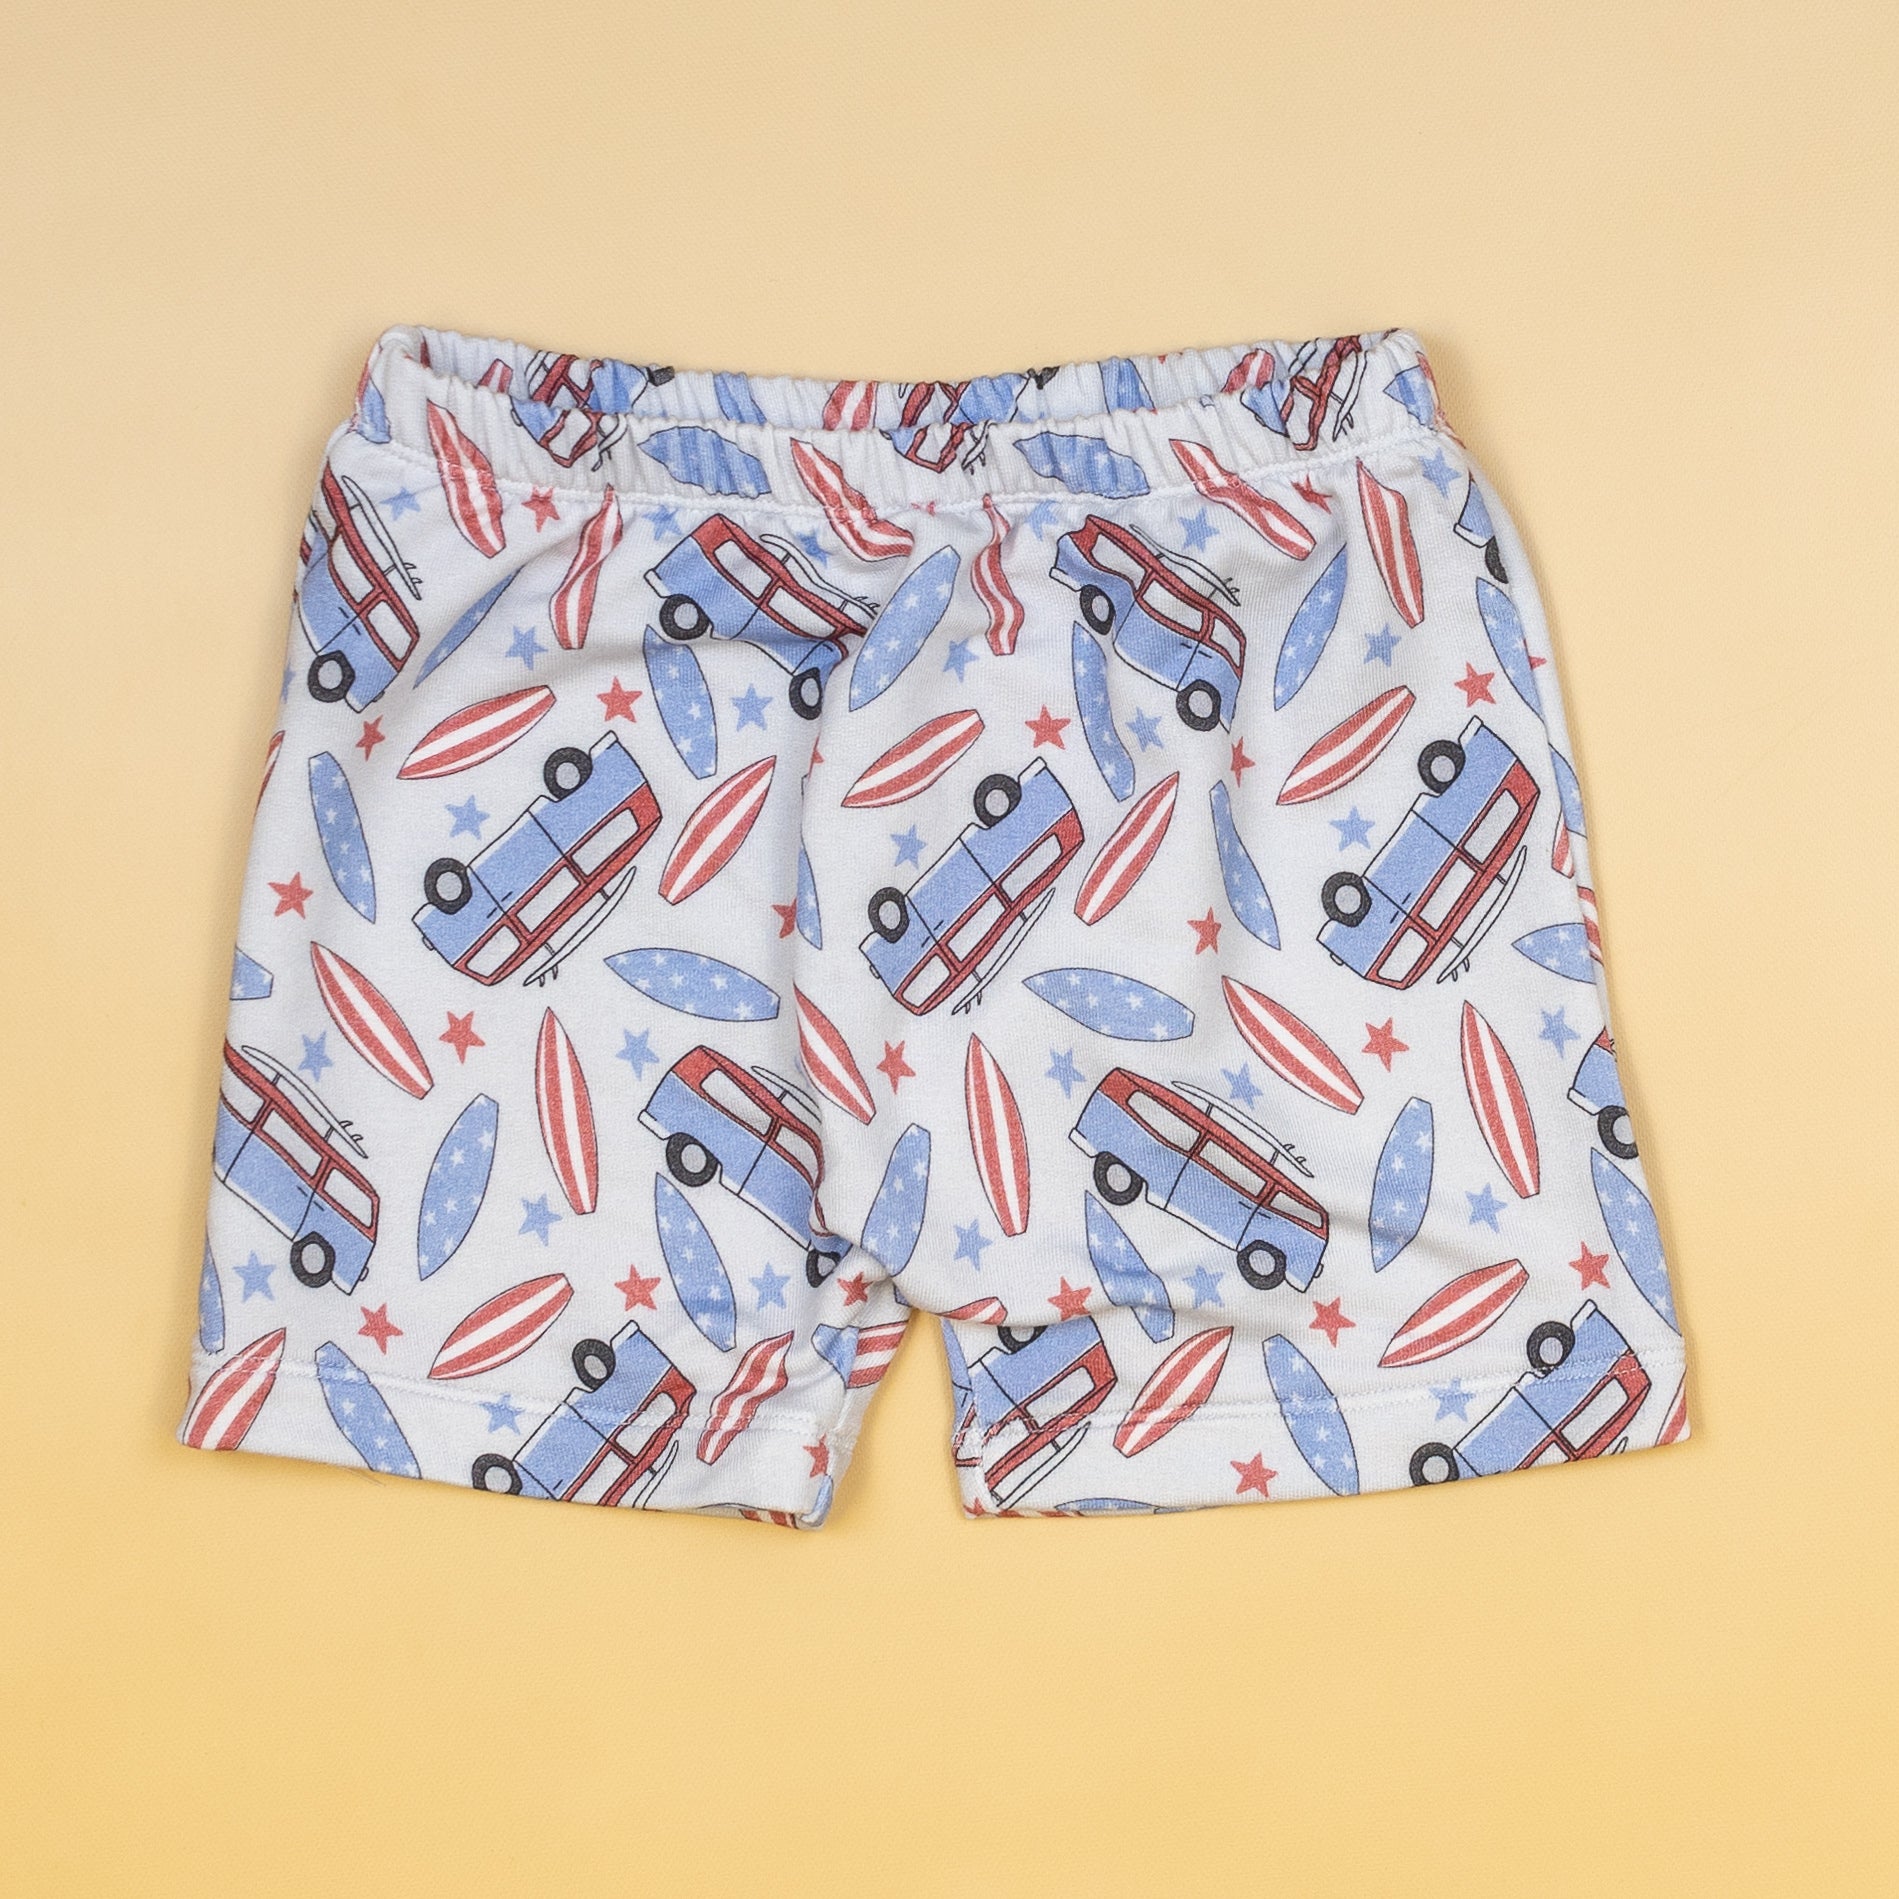 Cuddle Sleep Dream Rolled Hem Shorts Surfin' the USA | Bamboo French Terry Shorts